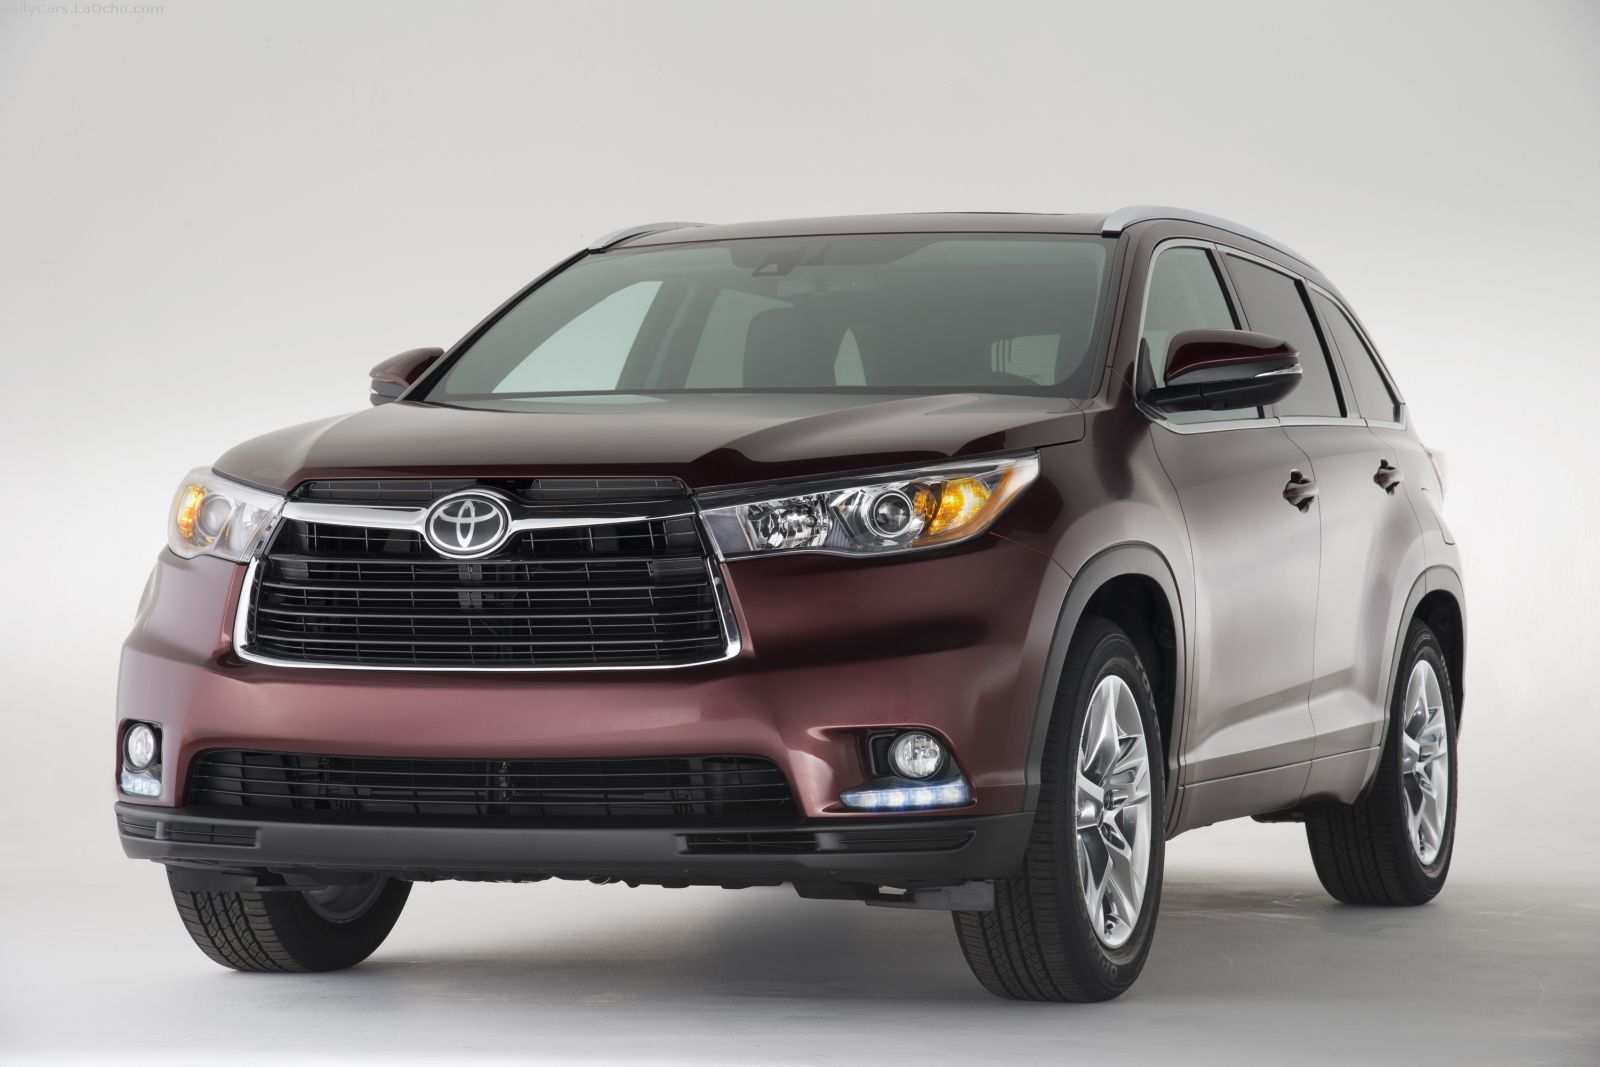 The all-new third-generation 2014 Toyota Highlander mid-size SUV made ...